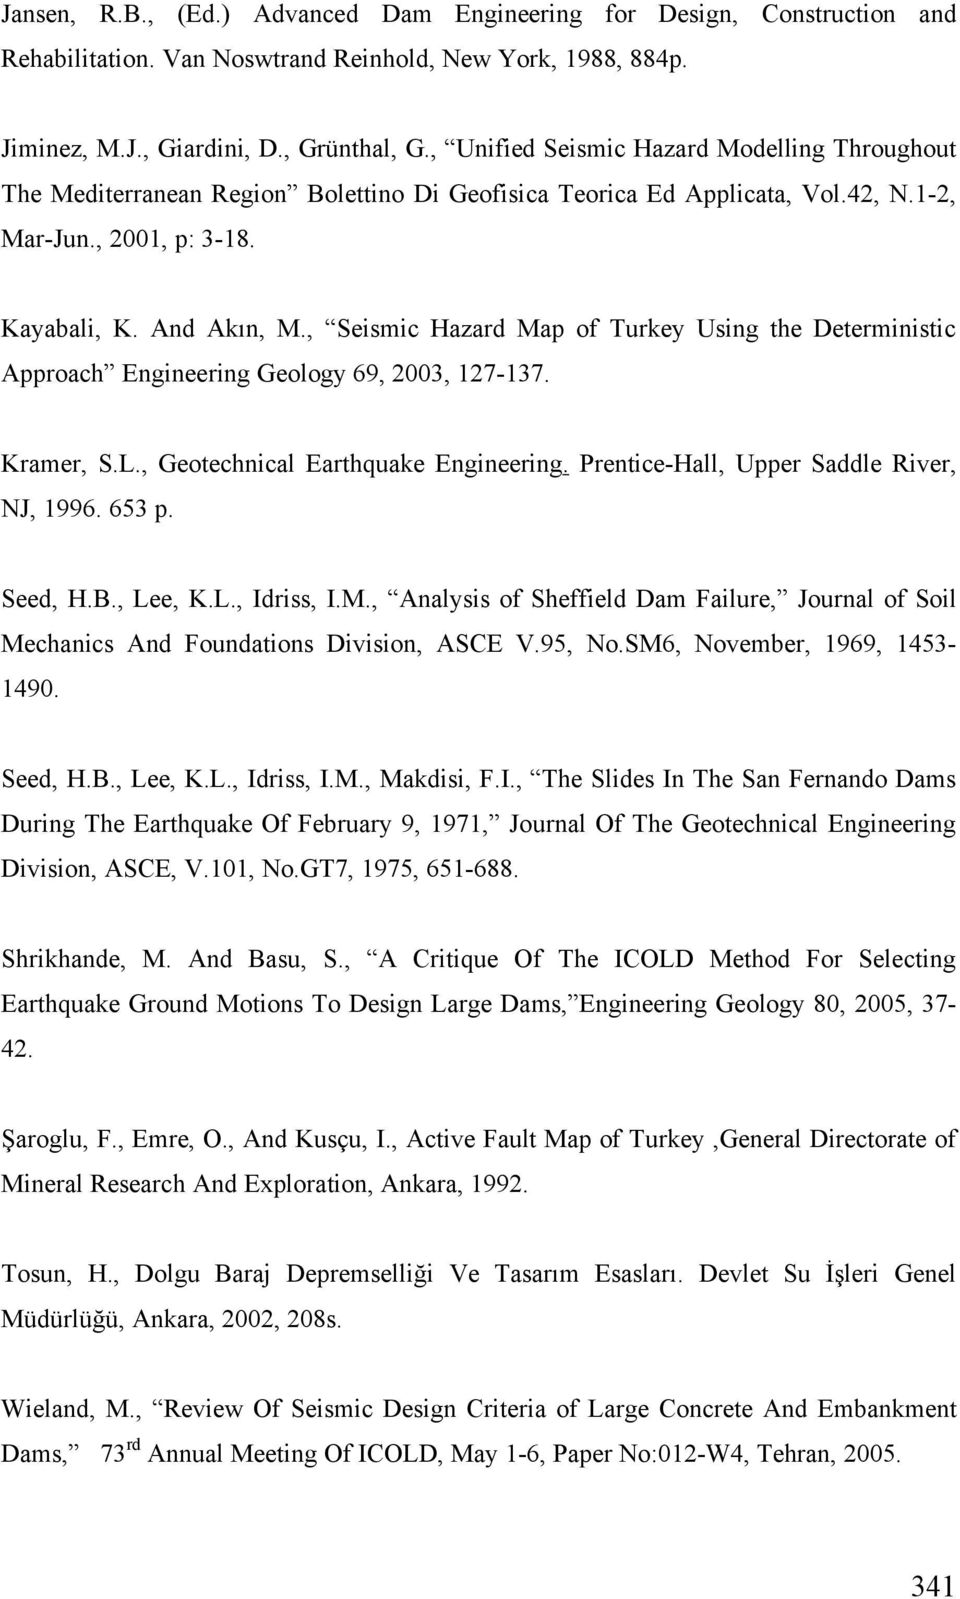 , Seismic Hazard Map of Turkey Using the Deterministic Approach Engineering Geology 69, 2003, 127-137. Kramer, S.L., Geotechnical Earthquake Engineering. Prentice-Hall, Upper Saddle River, NJ, 1996.